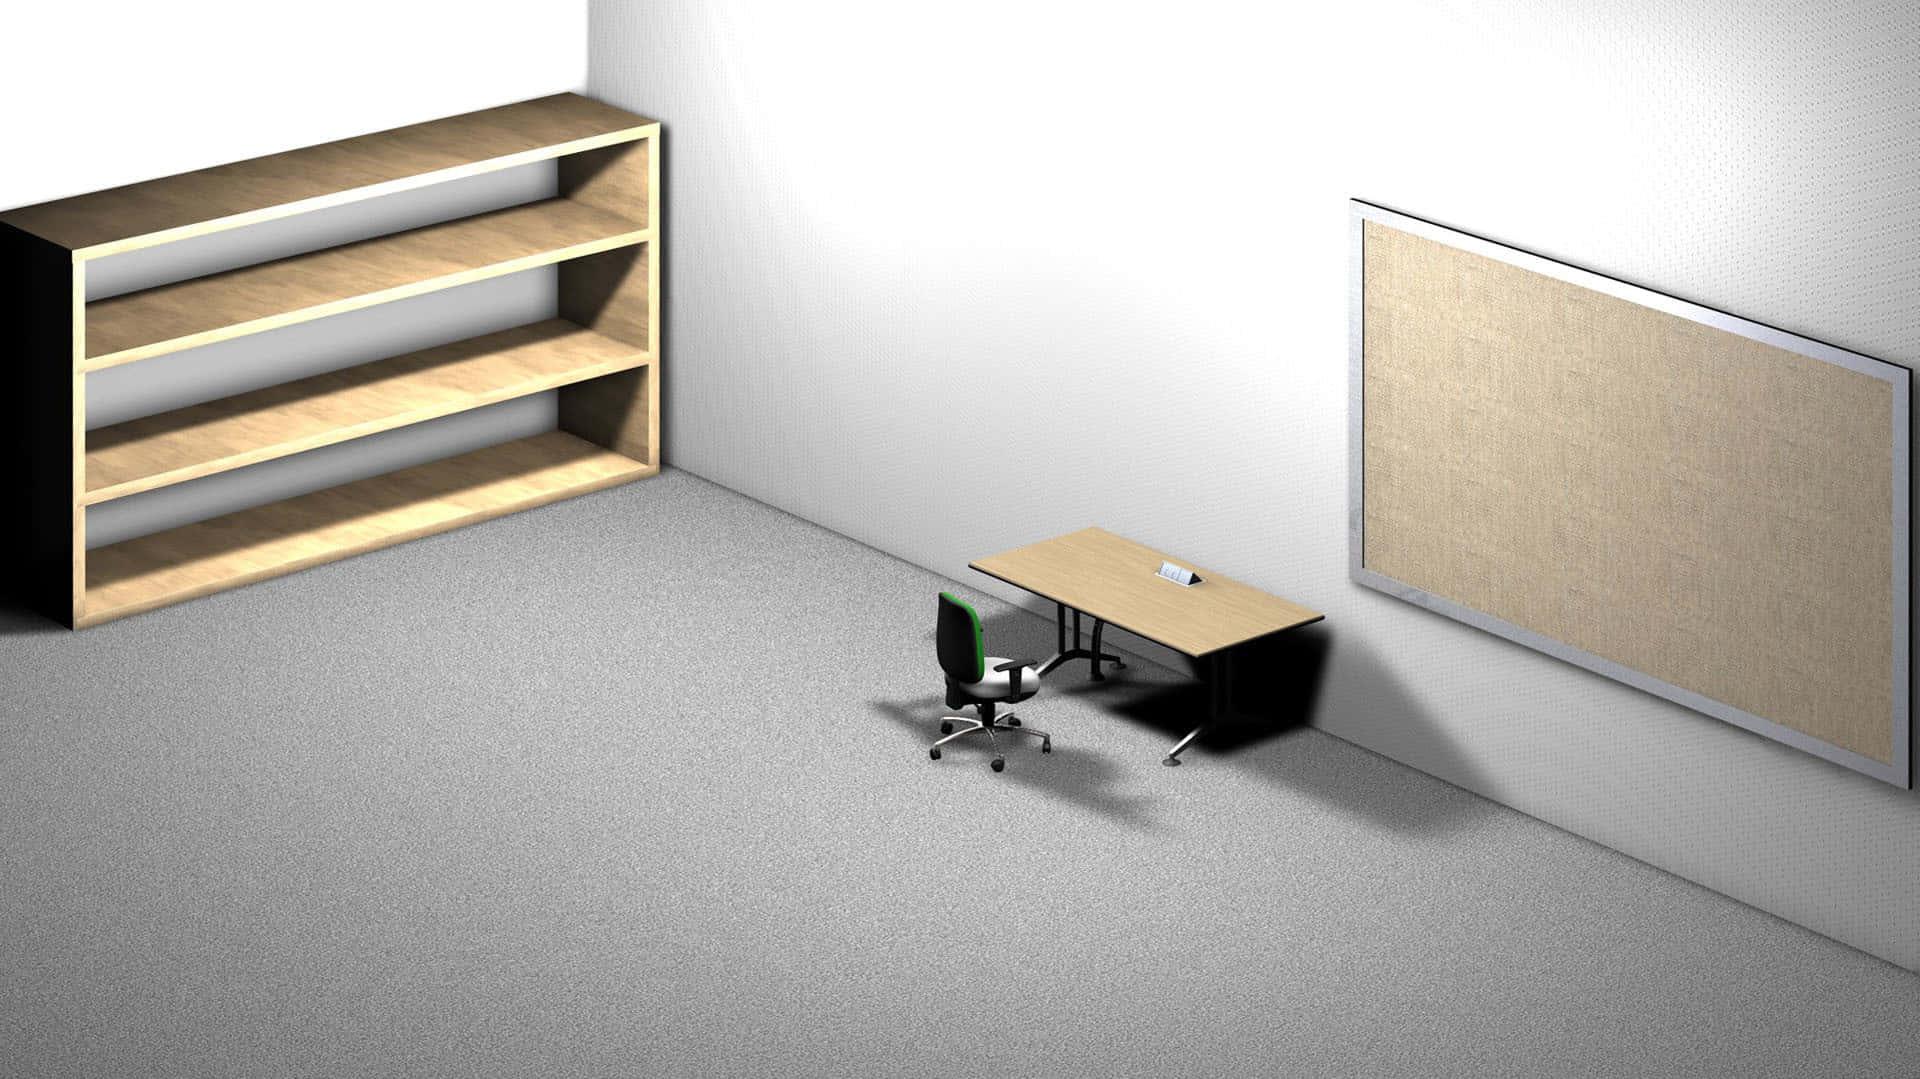 A 3d Model Of Room With Desk And Shelf Wallpaper